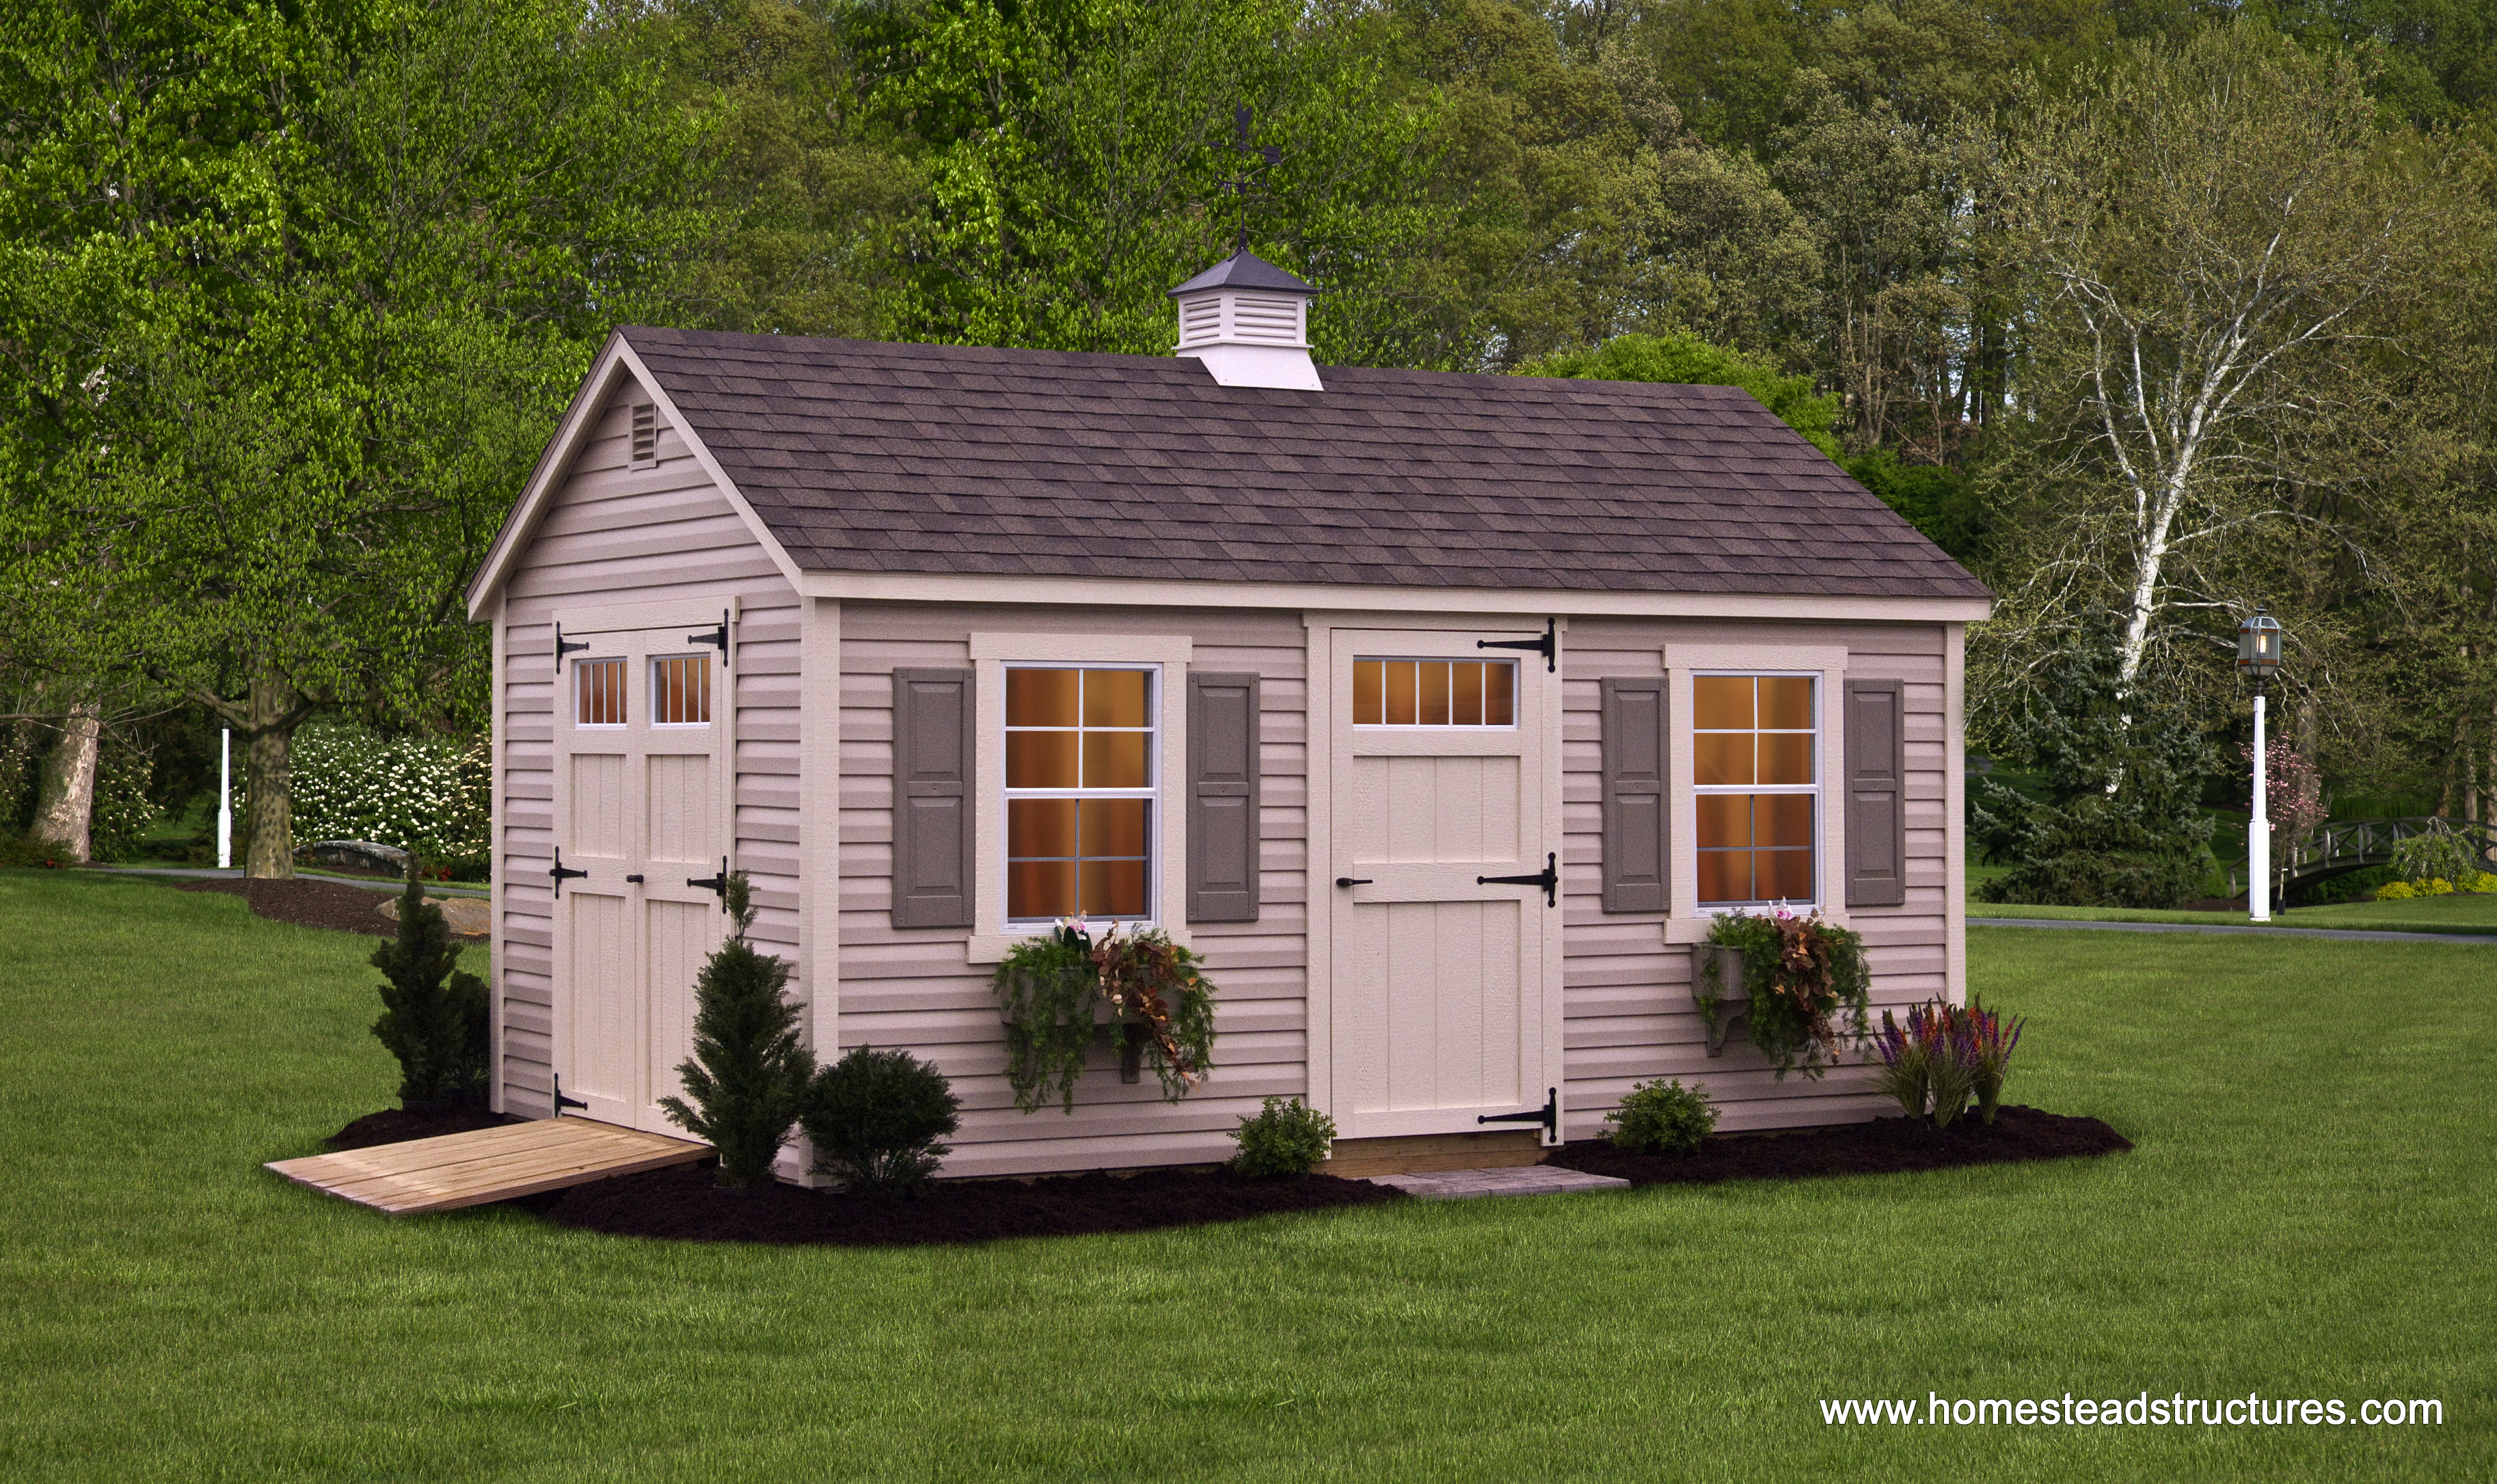 Custom Storage Sheds for Sale in PA, Garden Sheds, Amish 